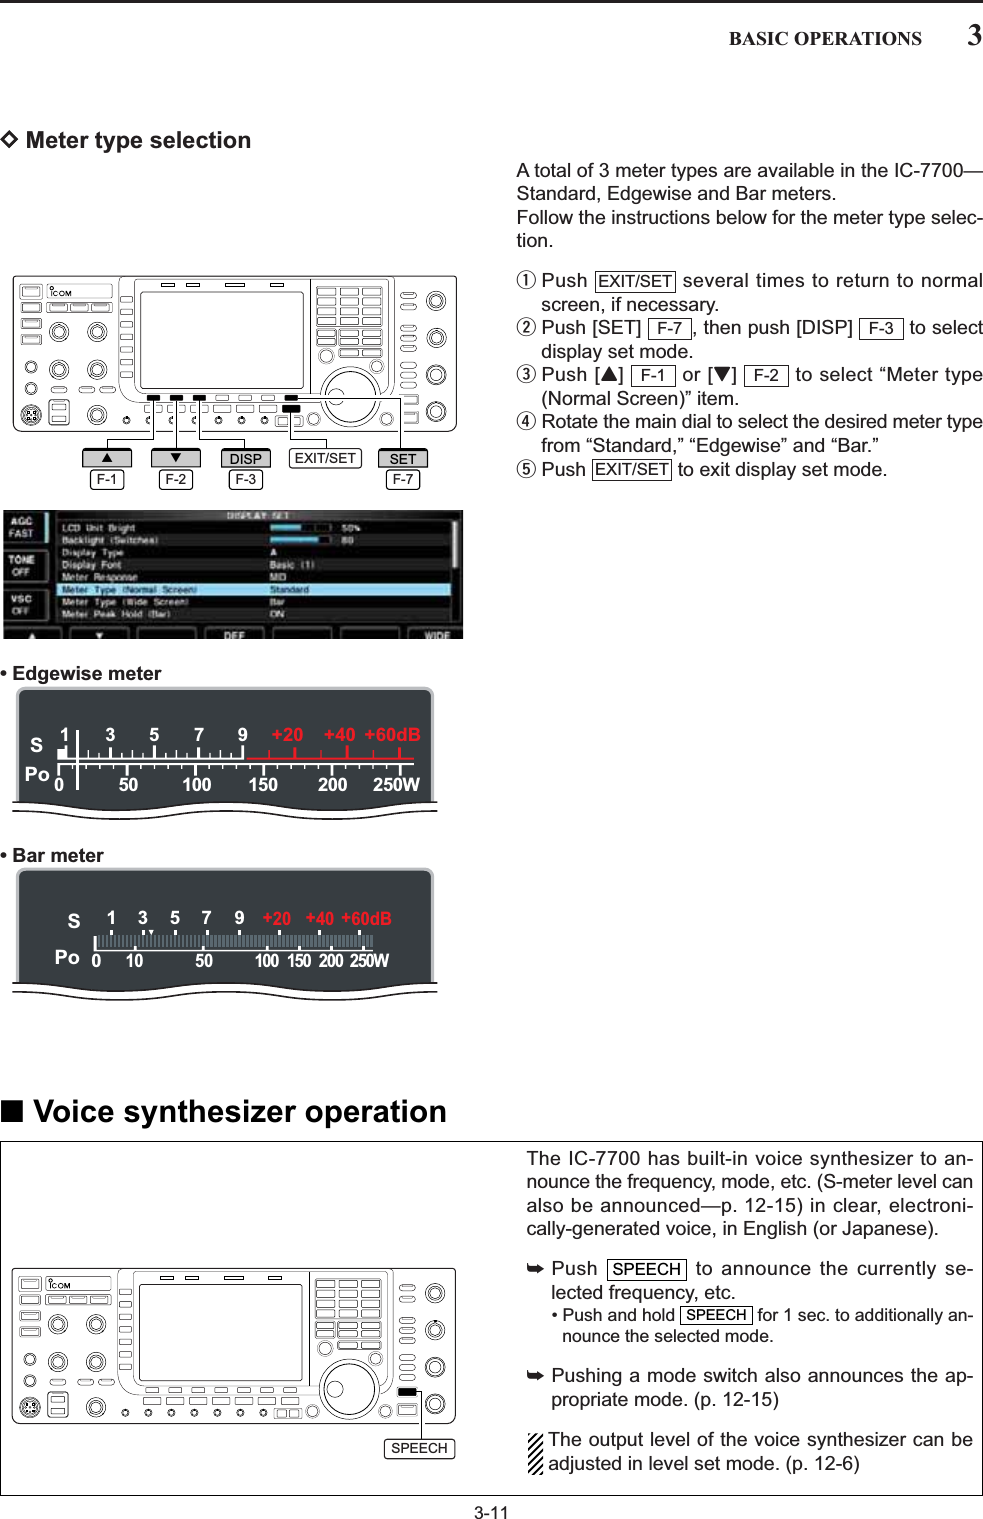 3-11DMeter type selectionA total of 3 meter types are available in the IC-7700—Standard, Edgewise and Bar meters. Follow the instructions below for the meter type selec-tion.qPush  several times to return to normalscreen, if necessary.wPush [SET]  , then push [DISP]  to selectdisplay set mode.ePush [Y] or [Z]  to select “Meter type(Normal Screen)” item.rRotate the main dial to select the desired meter typefrom “Standard,” “Edgewise” and “Bar.”tPush  to exit display set mode.• Edgewise meter• Bar meterEXIT/SETF-2F-1F-3F-7EXIT/SET3BASIC OPERATIONSThe IC-7700 has built-in voice synthesizer to an-nounce the frequency, mode, etc. (S-meter level canalso be announced—p. 12-15) in clear, electroni-cally-generated voice, in English (or Japanese).➥Push  to announce the currently se-lected frequency, etc.• Push and hold  for 1 sec. to additionally an-nounce the selected mode.➥Pushing a mode switch also announces the ap-propriate mode. (p. 12-15)The output level of the voice synthesizer can beadjusted in level set mode. (p. 12-6)SPEECHSPEECH■Voice synthesizer operationEXIT/SETF-7SETF-3DISPF-1∫F-2√SPo13579250W200100 150500+20 +40 +60dBSPo1357 9250W200100 15050010+20 +40 +60dBSPEECH